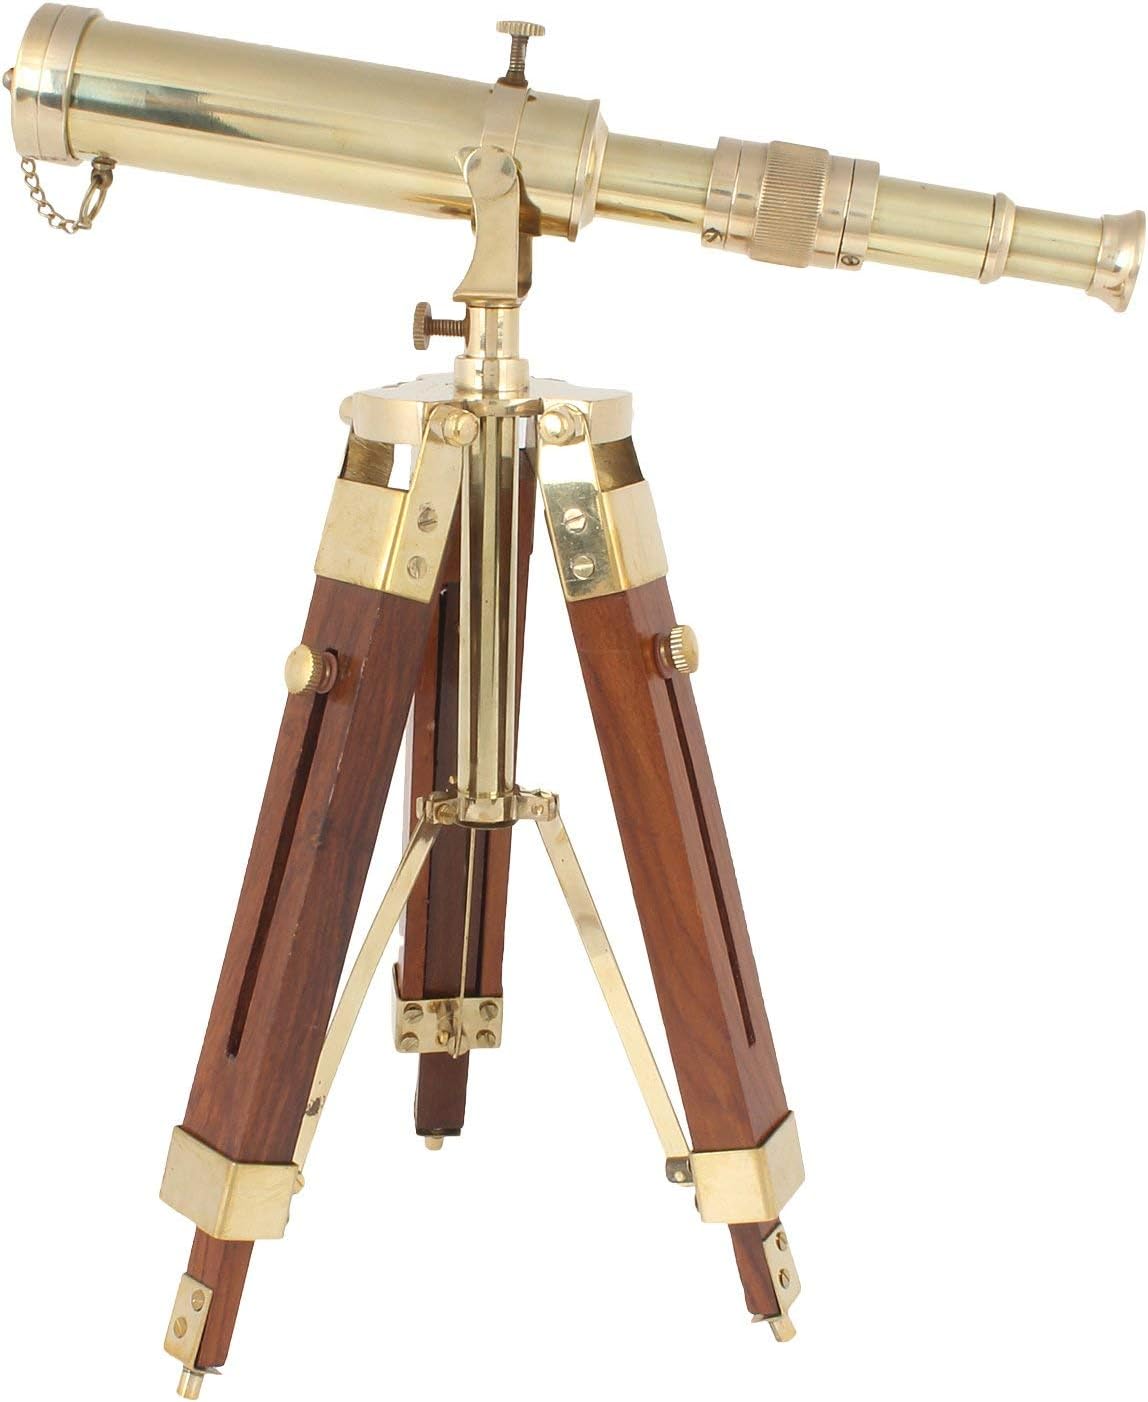 Vintage Brass Telescope on Tripod Stand use Lens [...]